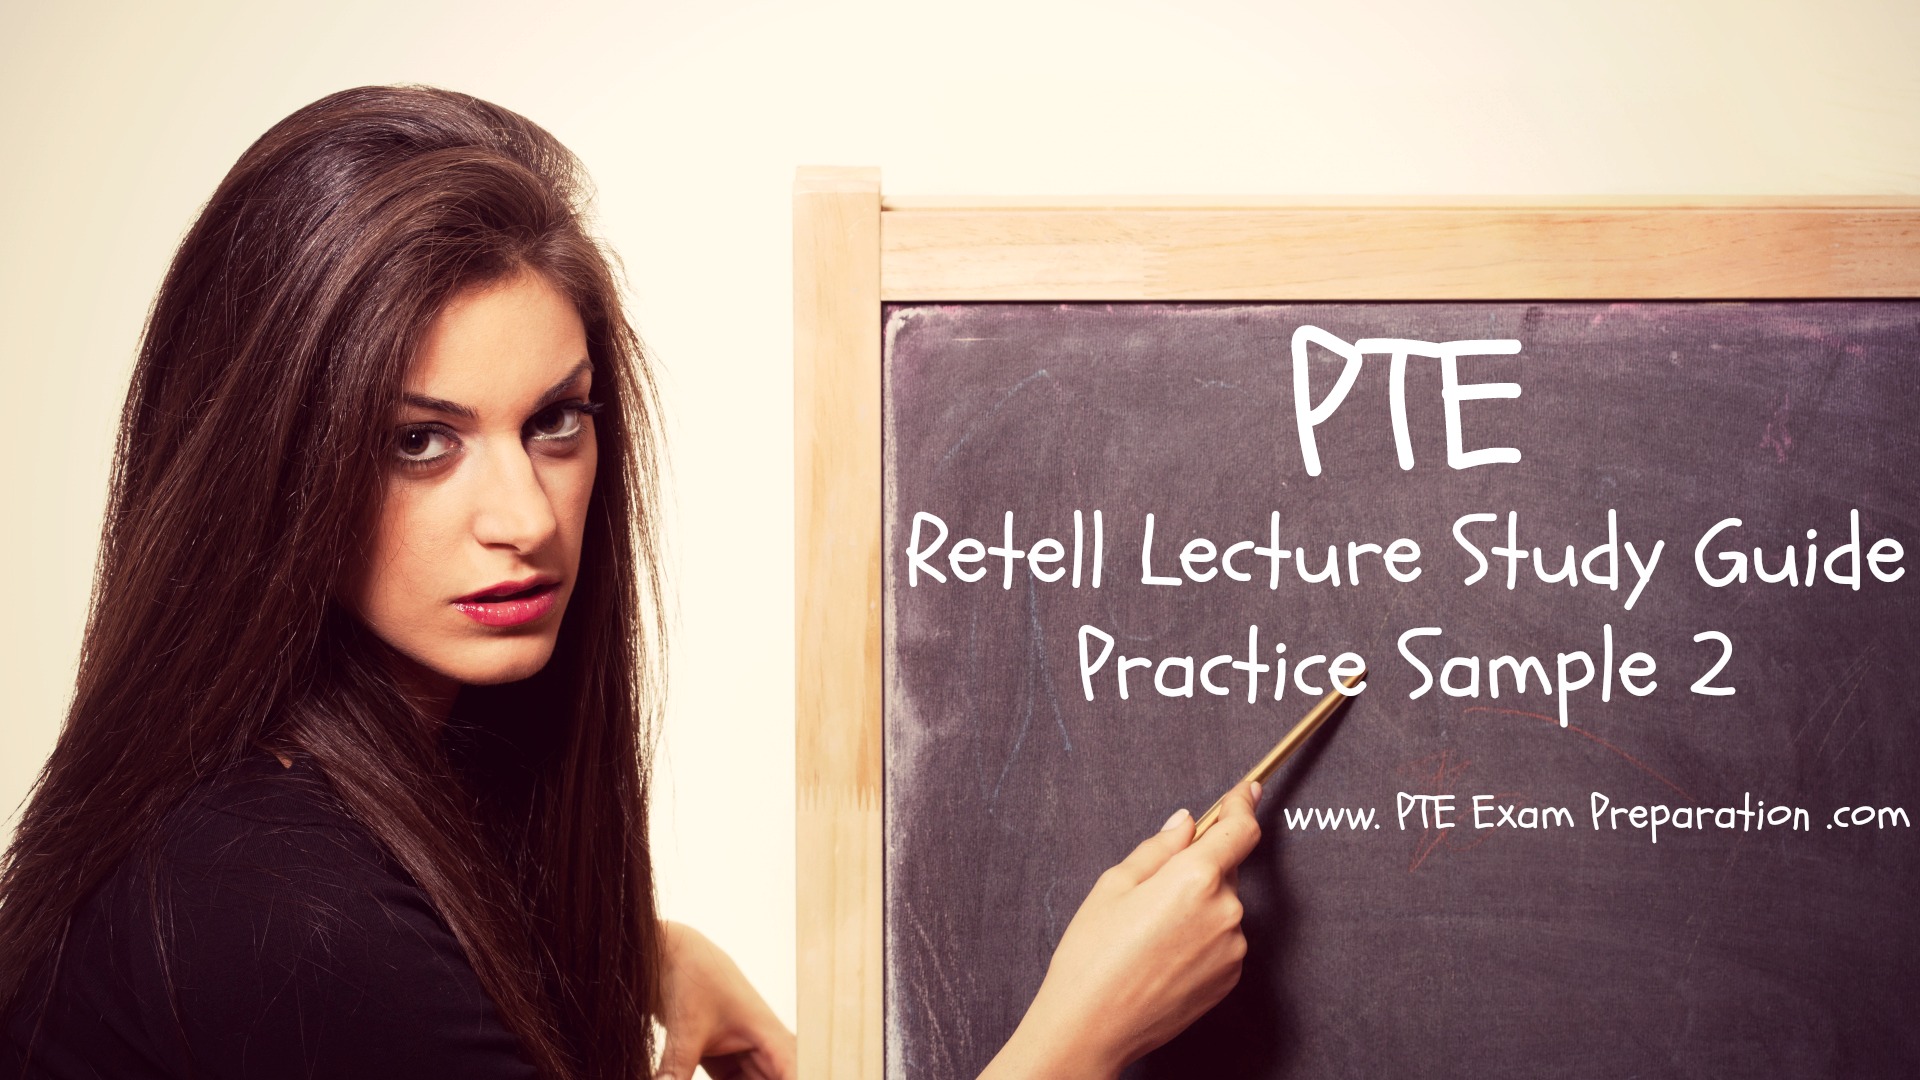 PTE Academic Speaking Retell Lecture Study Guide Practice Sample 2